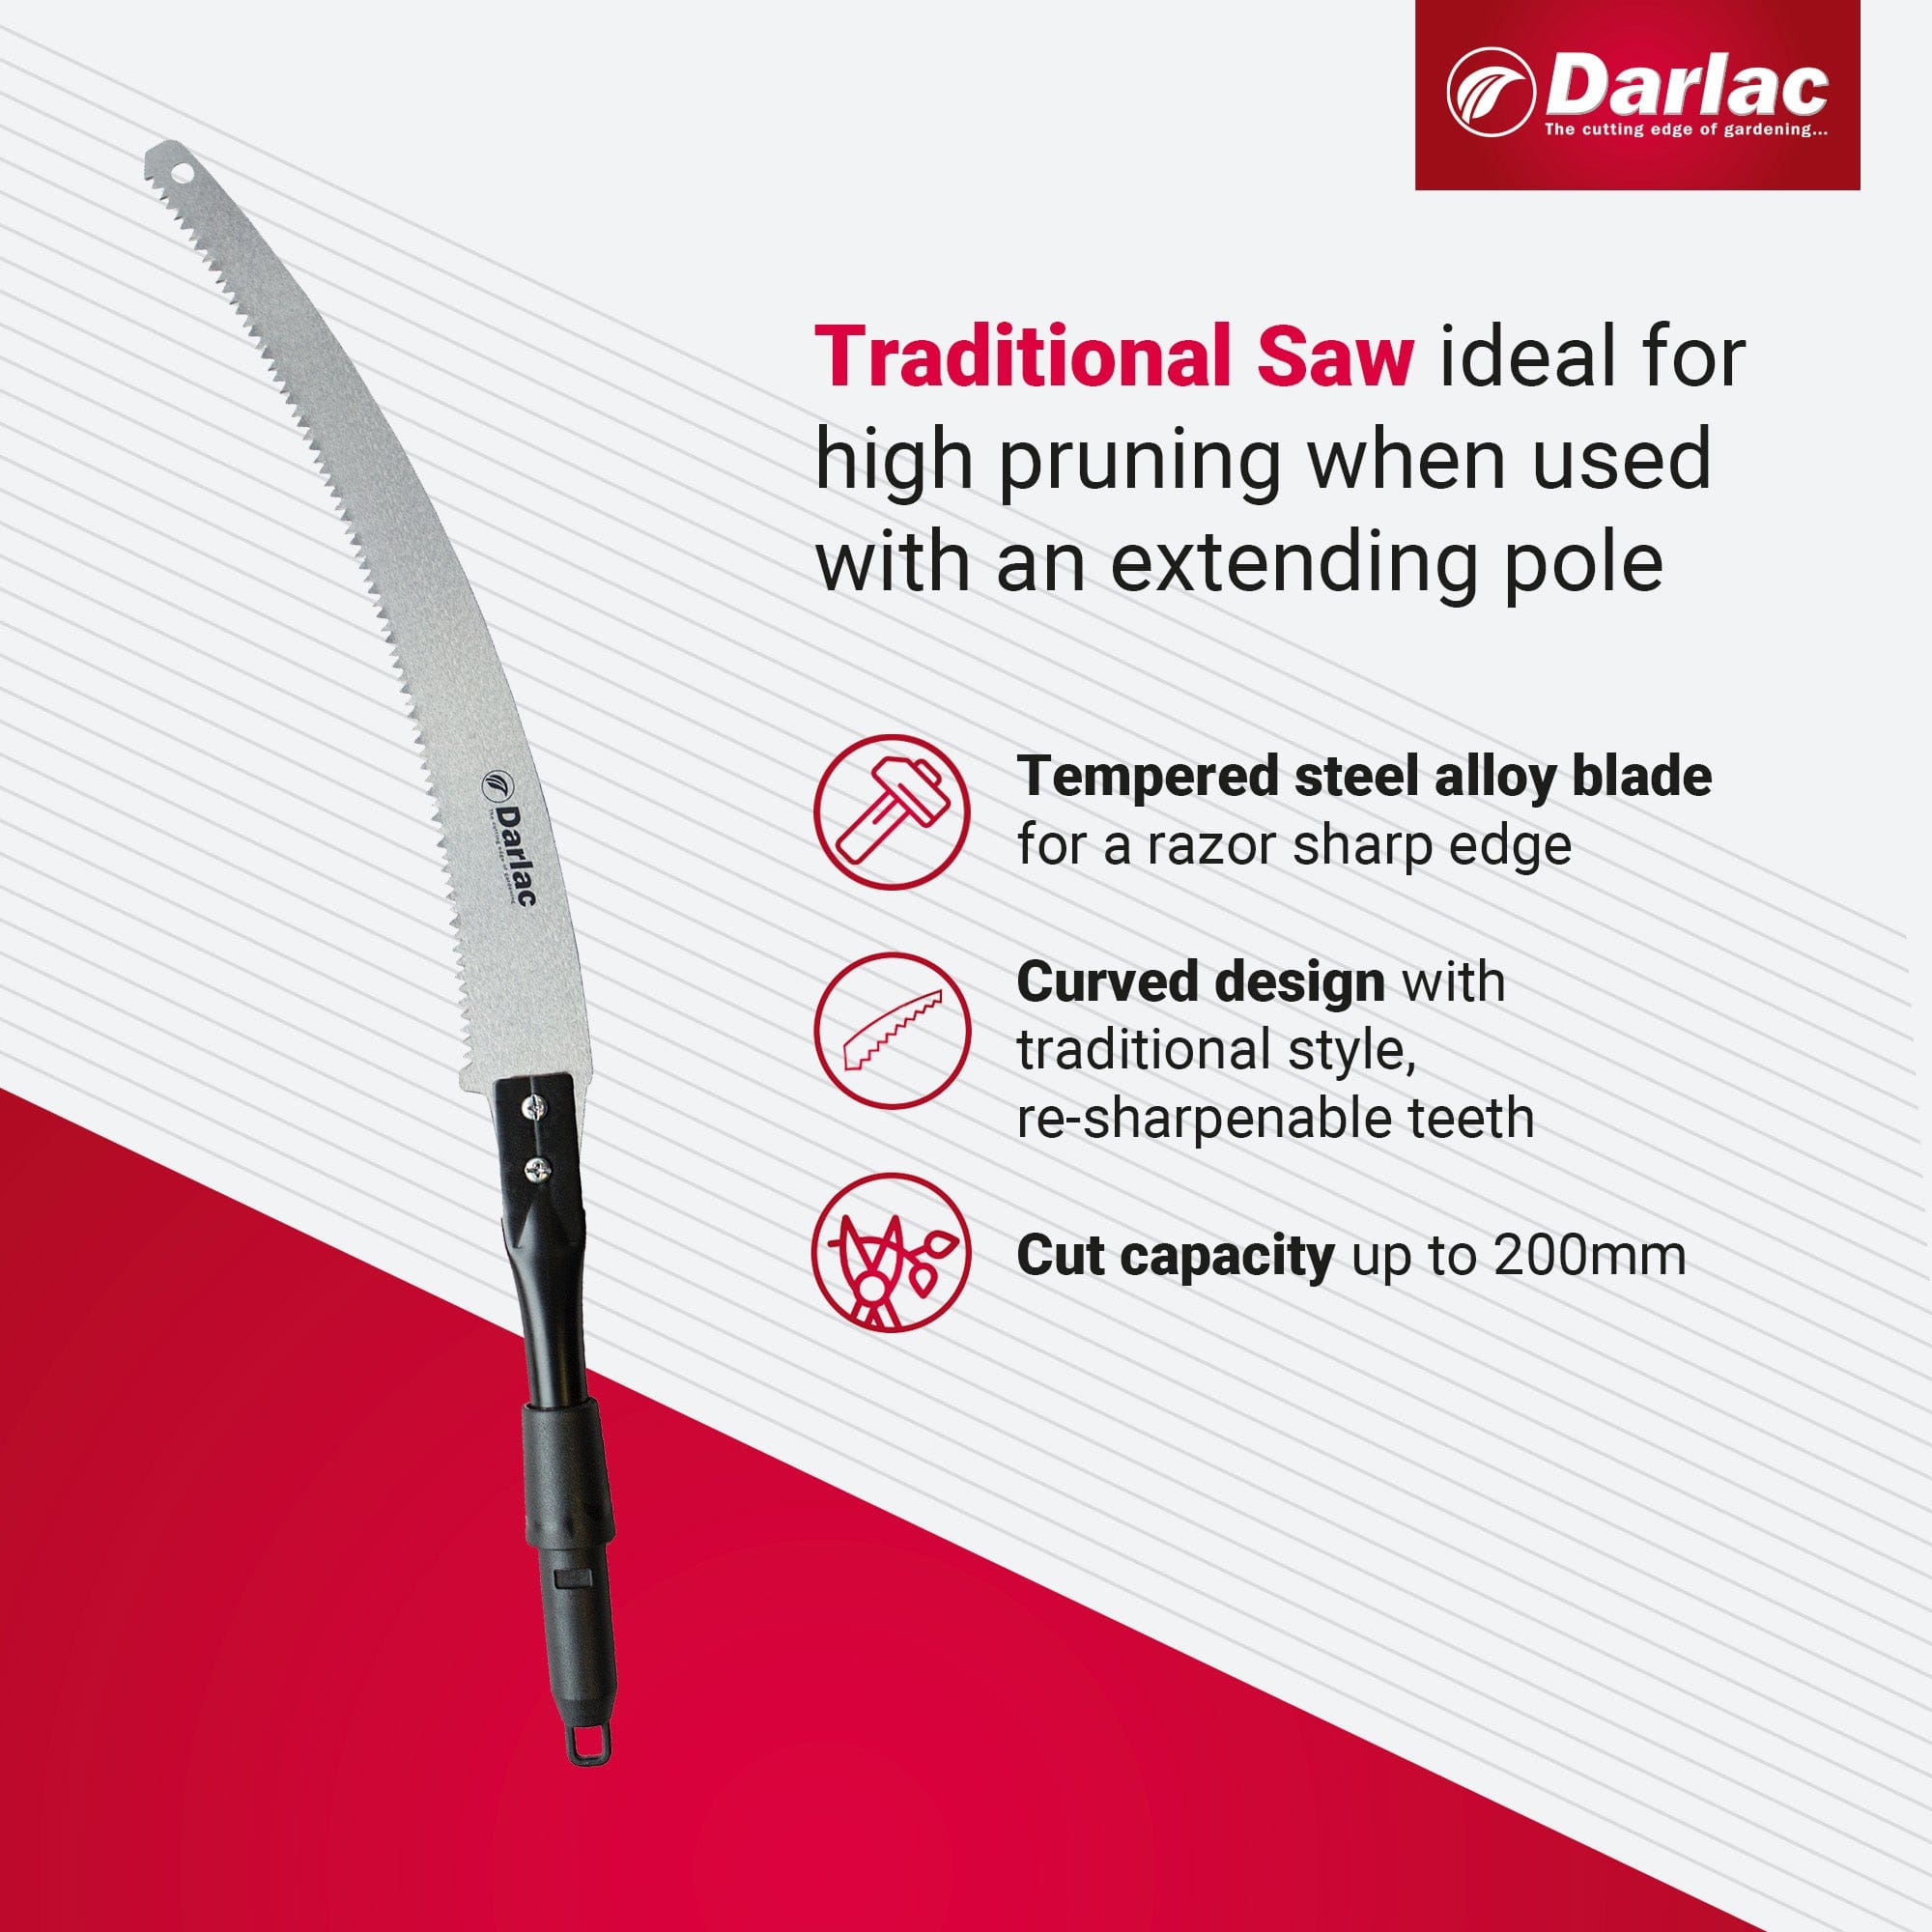 dt-brown HARDWARE Darlac Swop Top Traditional Saw Head